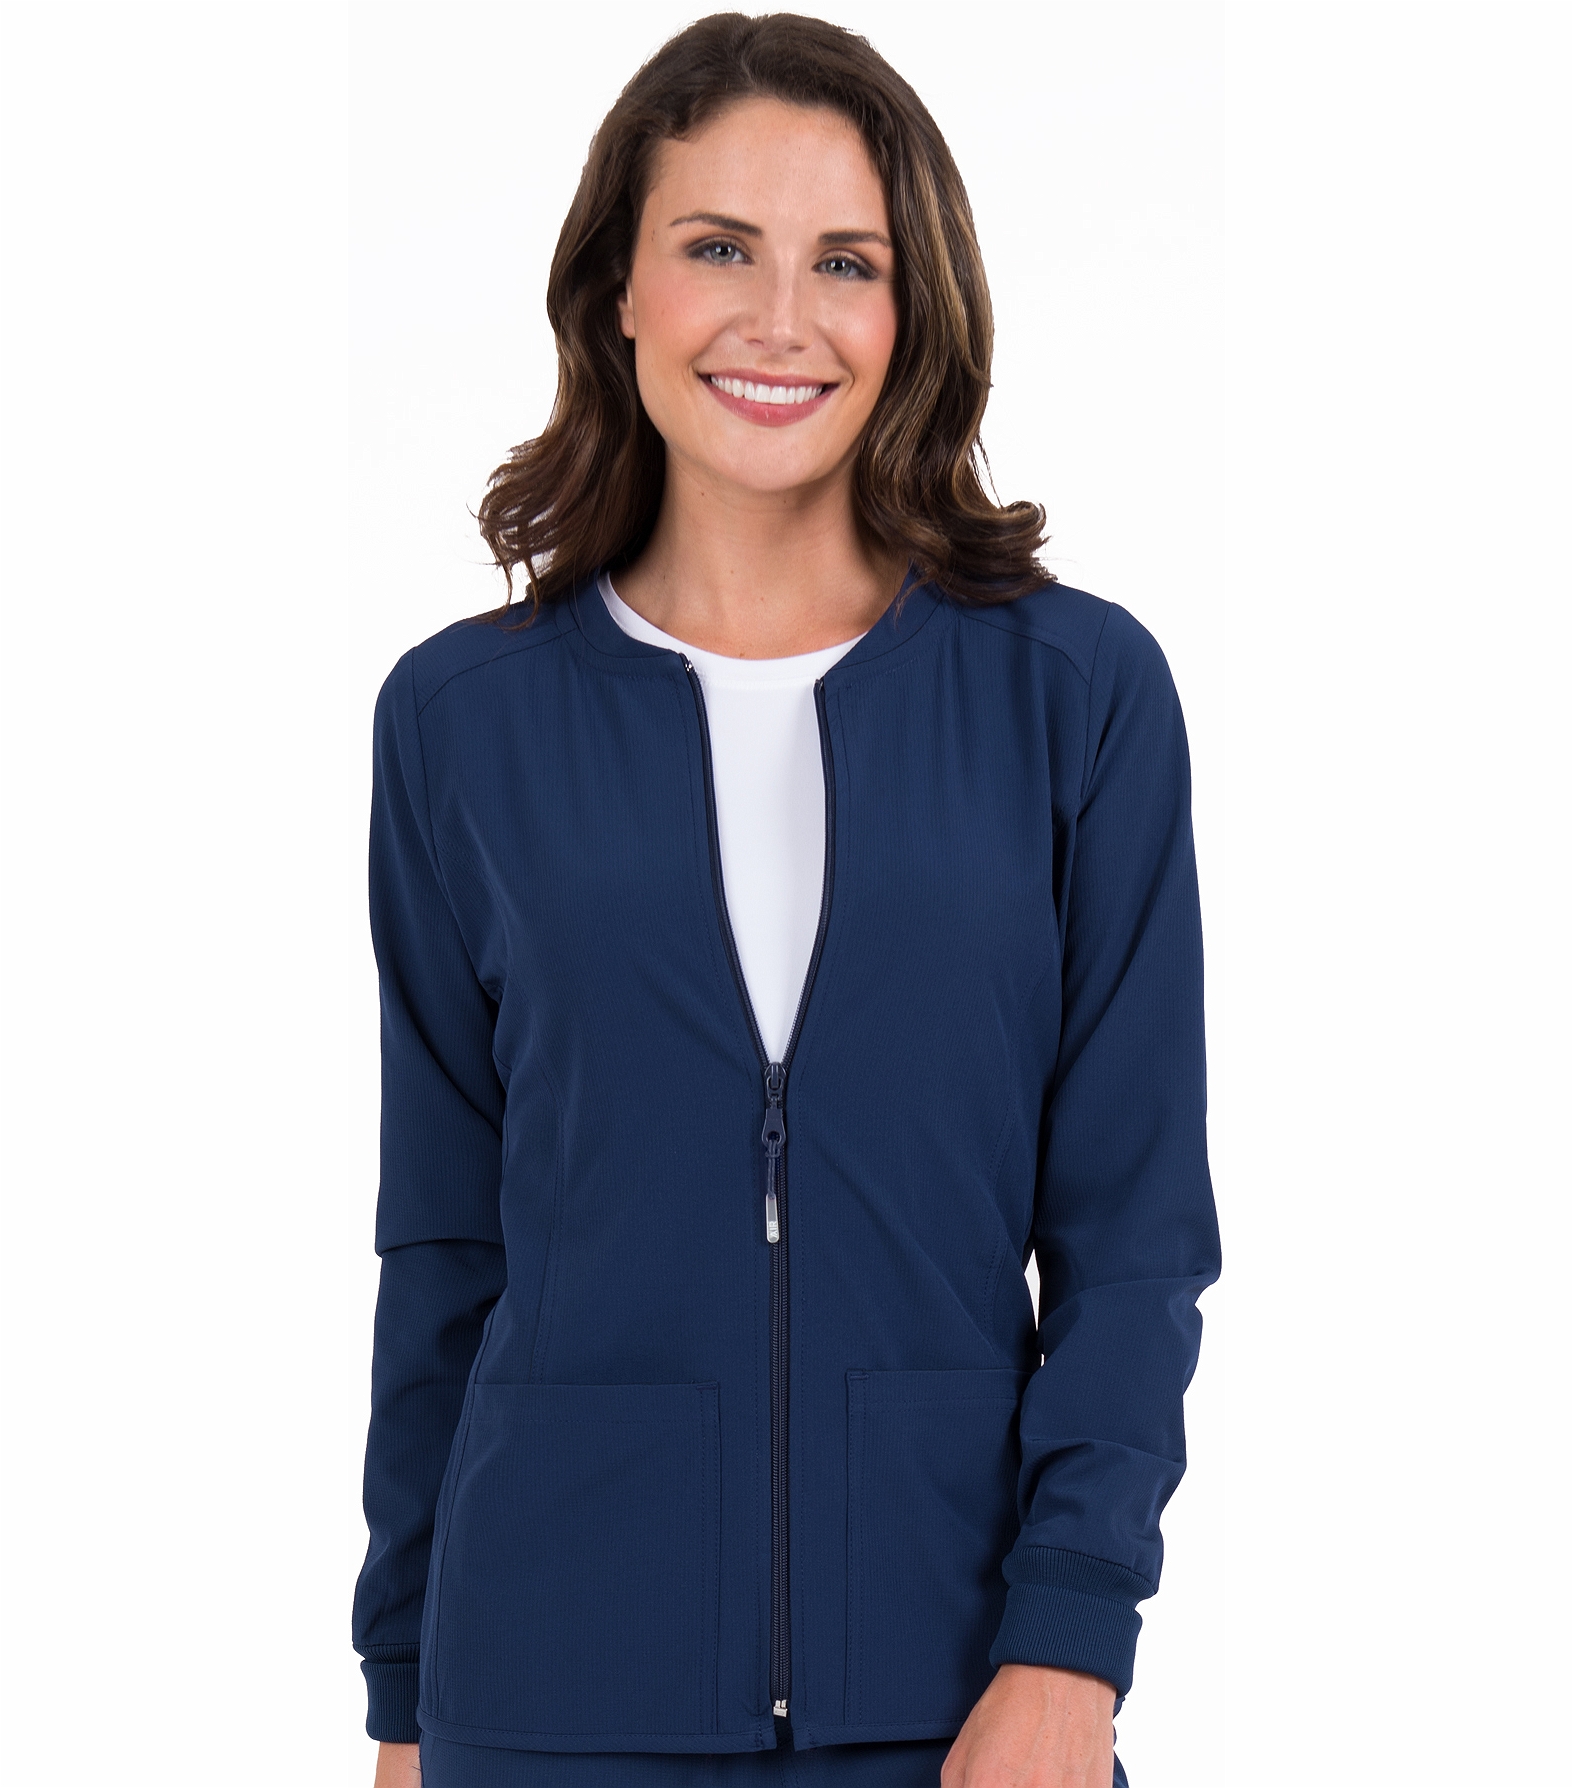 Staying Cozy This Season - Medical Scrubs Collection